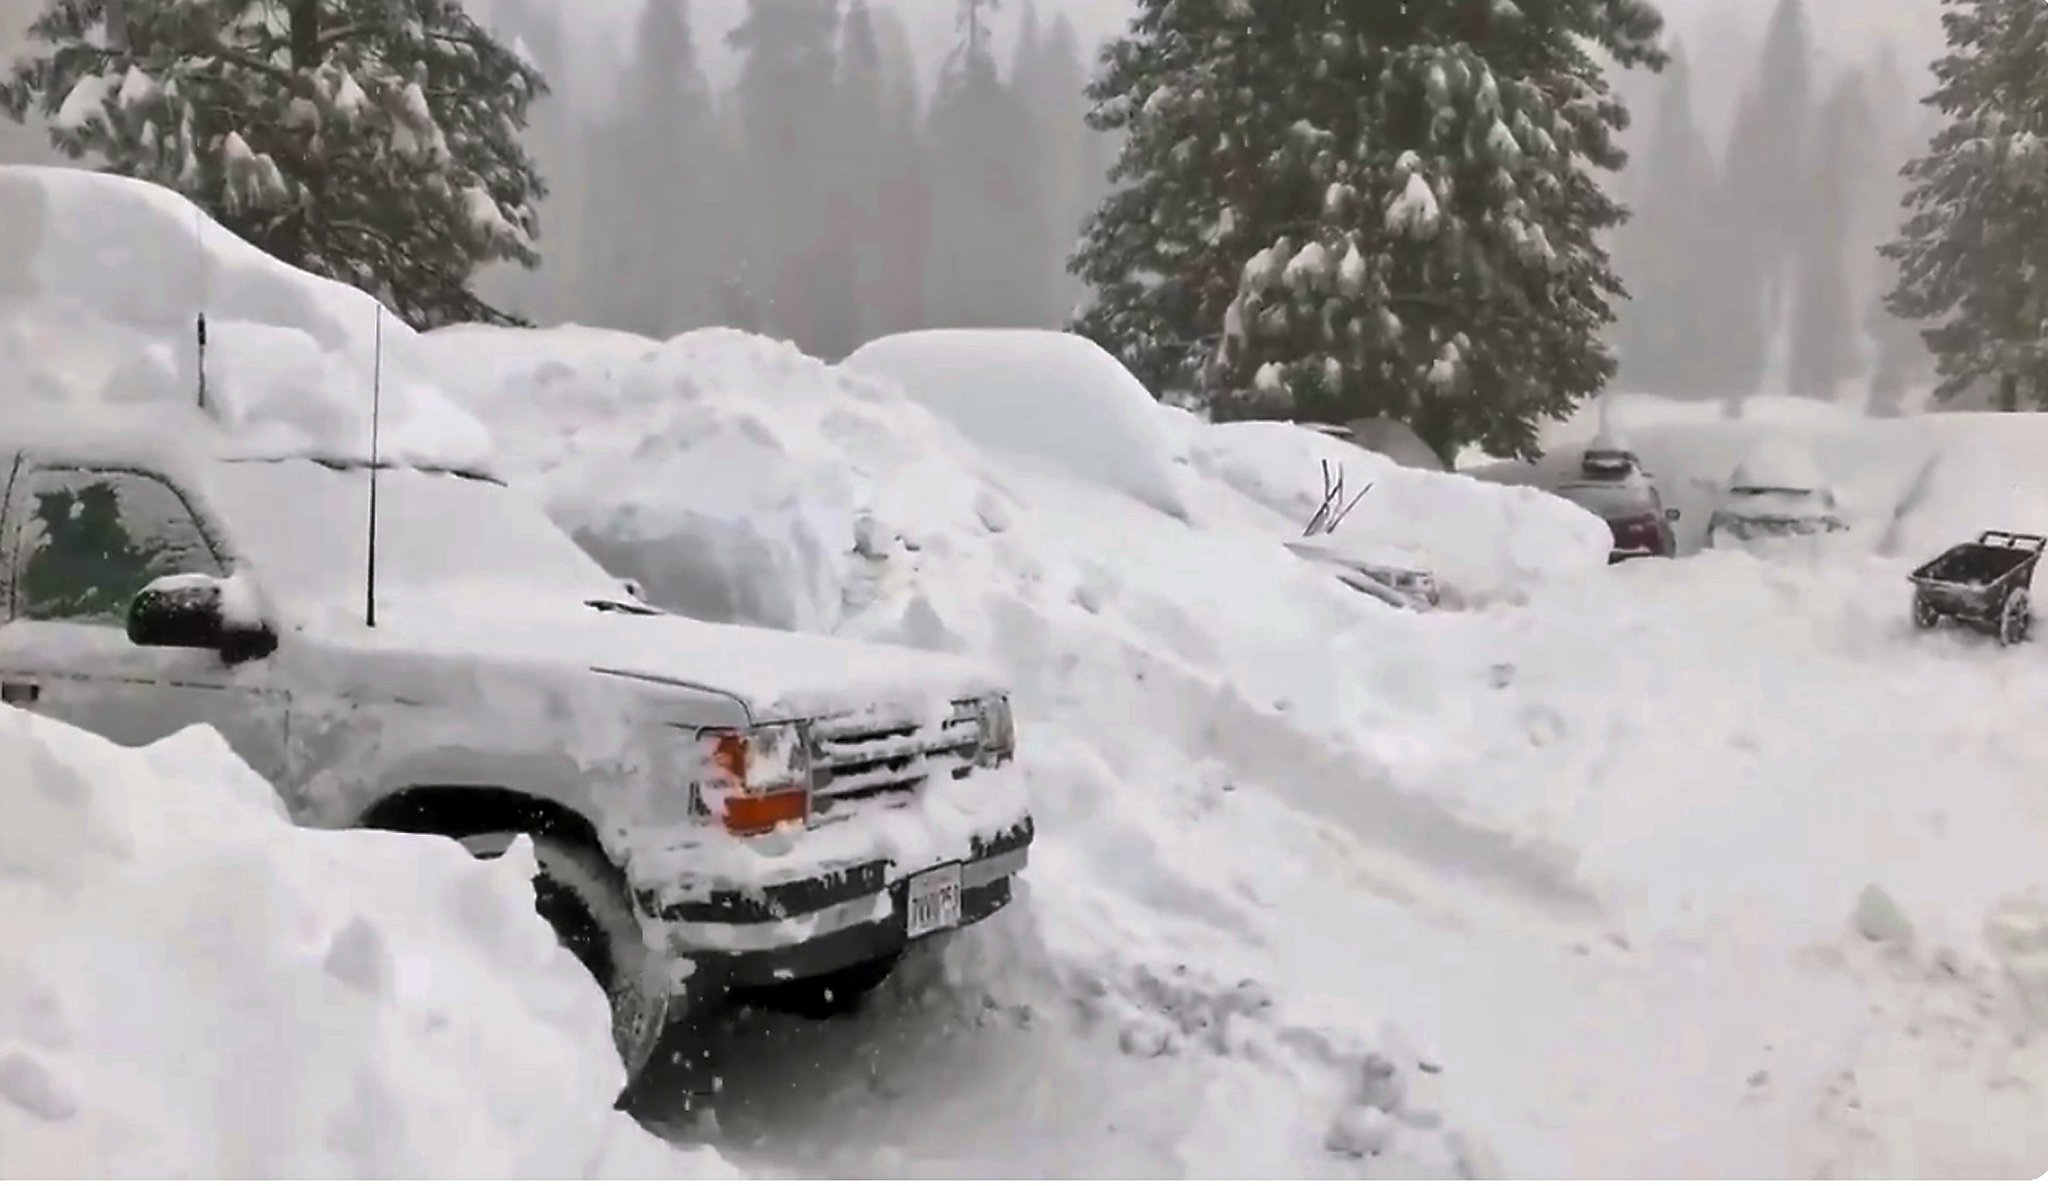 Snow Sierra expects several feet, plus road closures